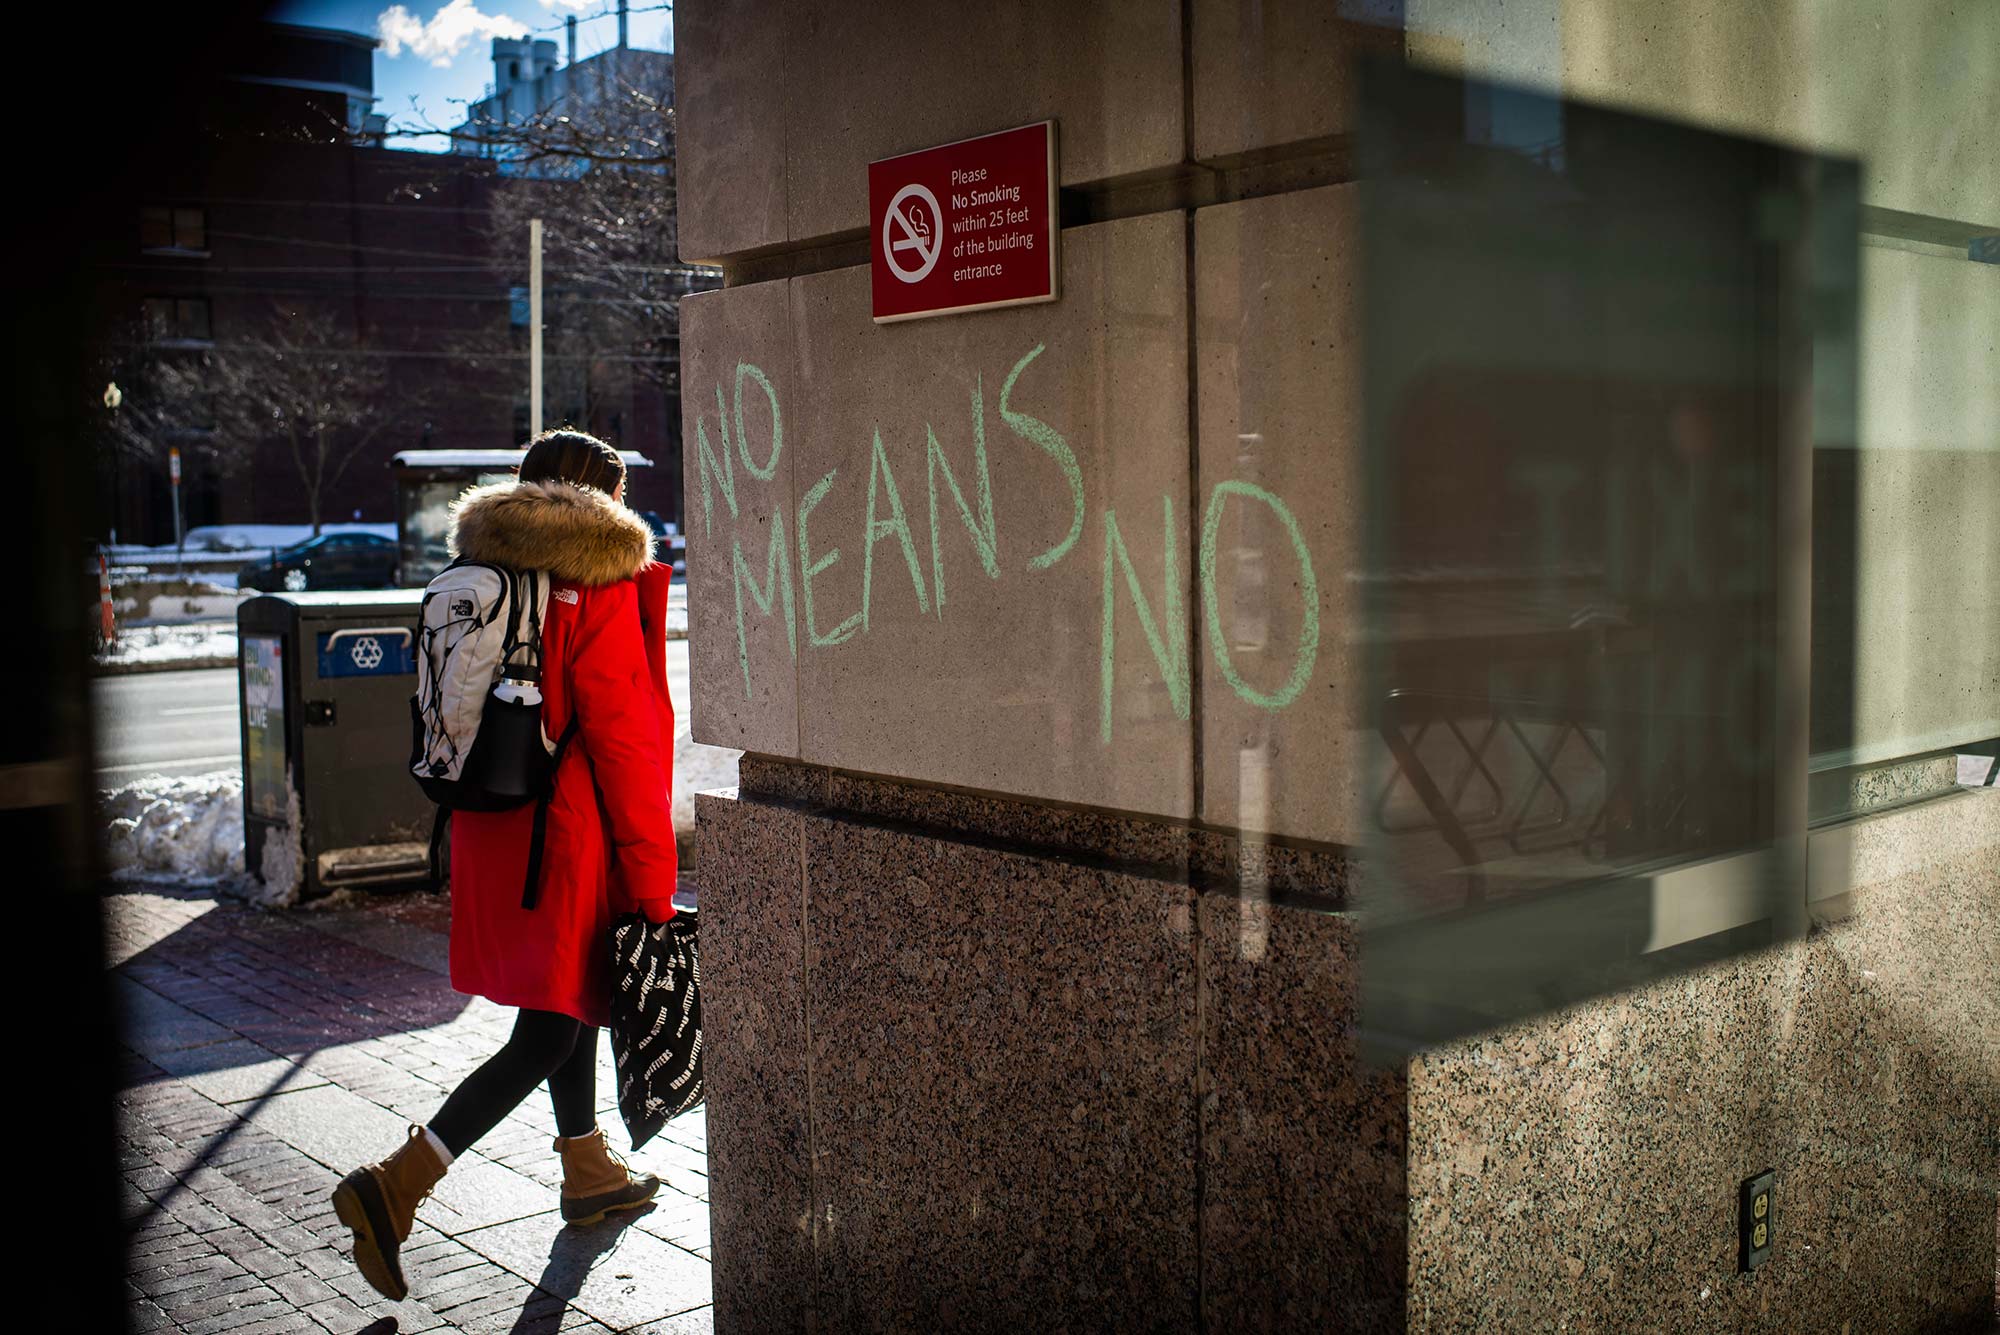 Photo of a cement building column that has the words "No means no" written in green chalk on it. A no smoking sign hangs above. In the background, a person in a red winter jacket, backpack, and bag in their hand walks down the sidewalk.